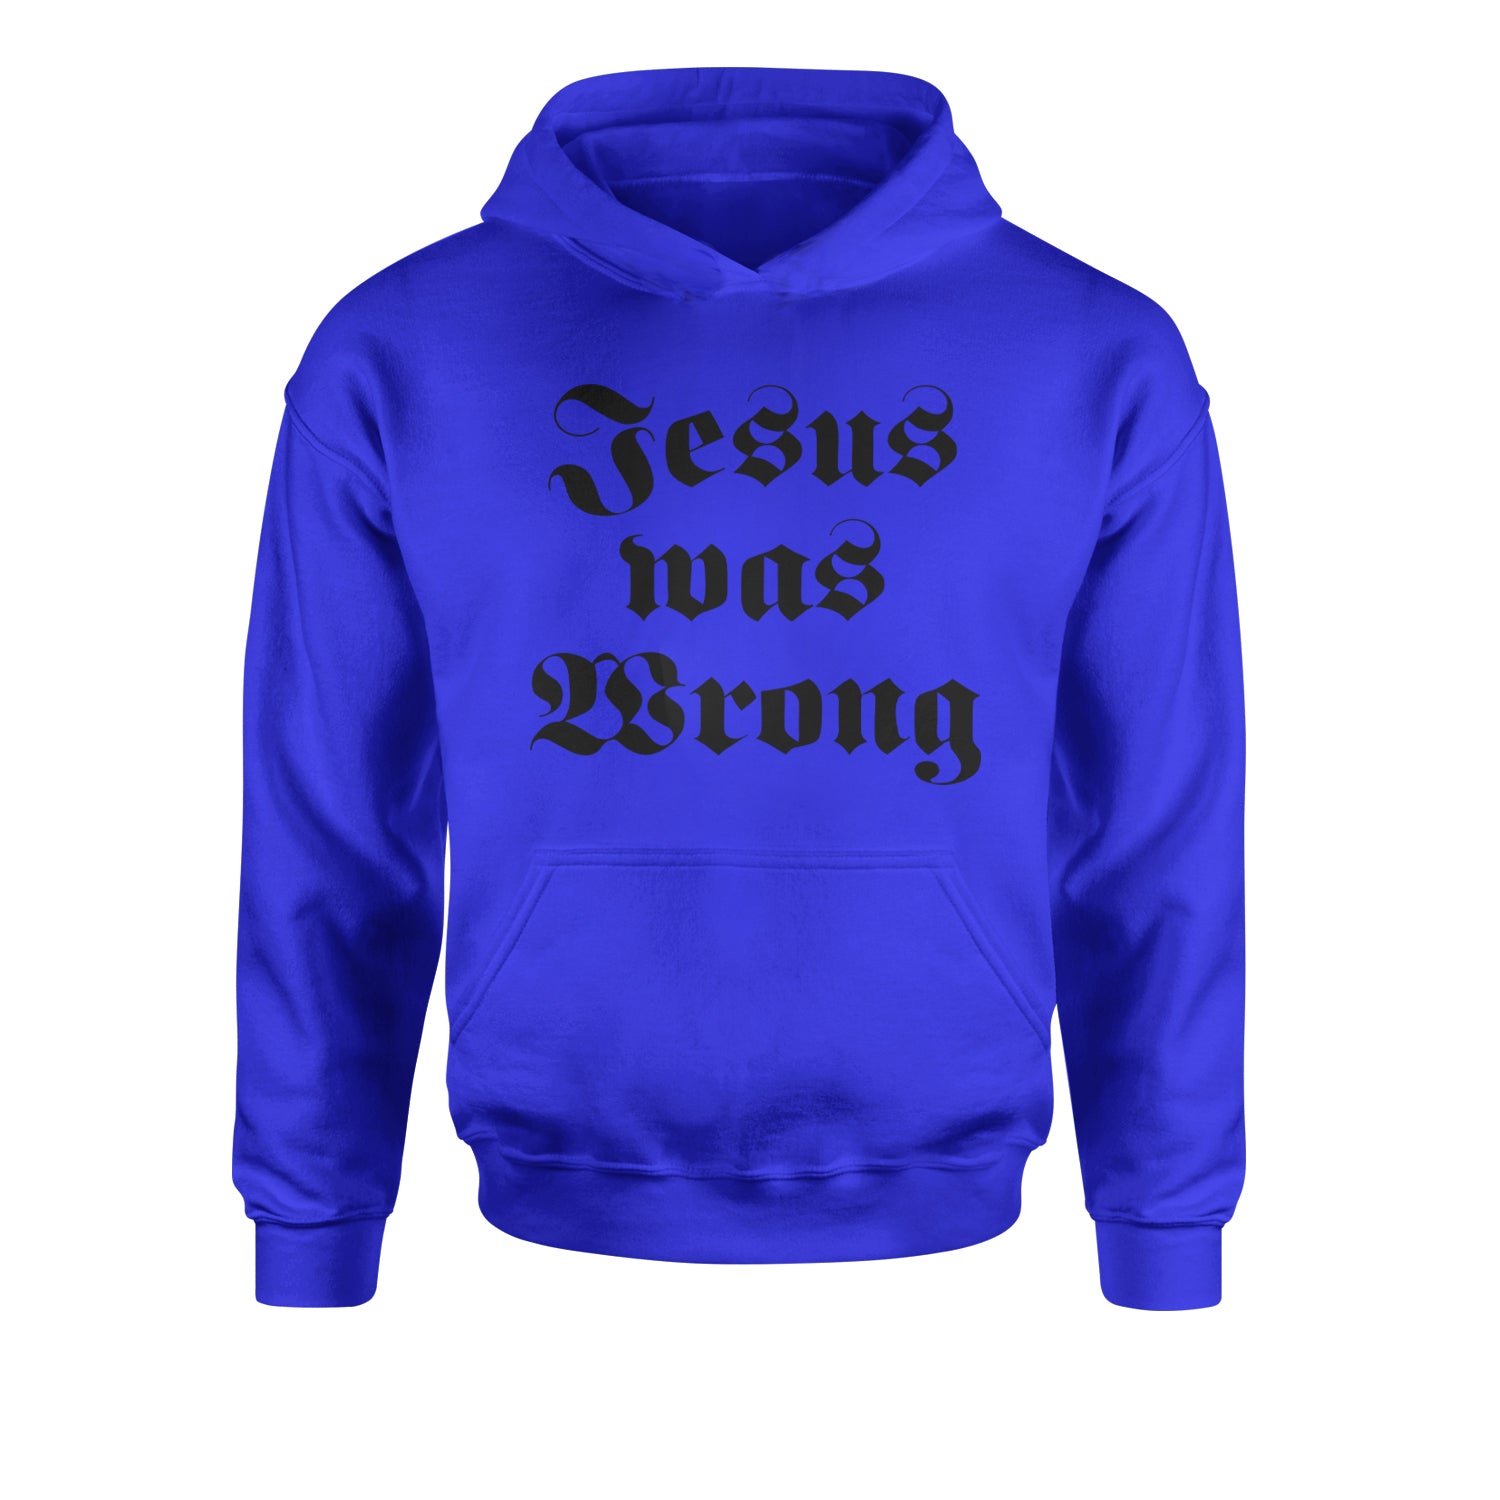 Jesus Was Wrong Little Miss Sunshine Youth-Sized Hoodie breslin, dano, movie, paul, shine, shirt, sun by Expression Tees